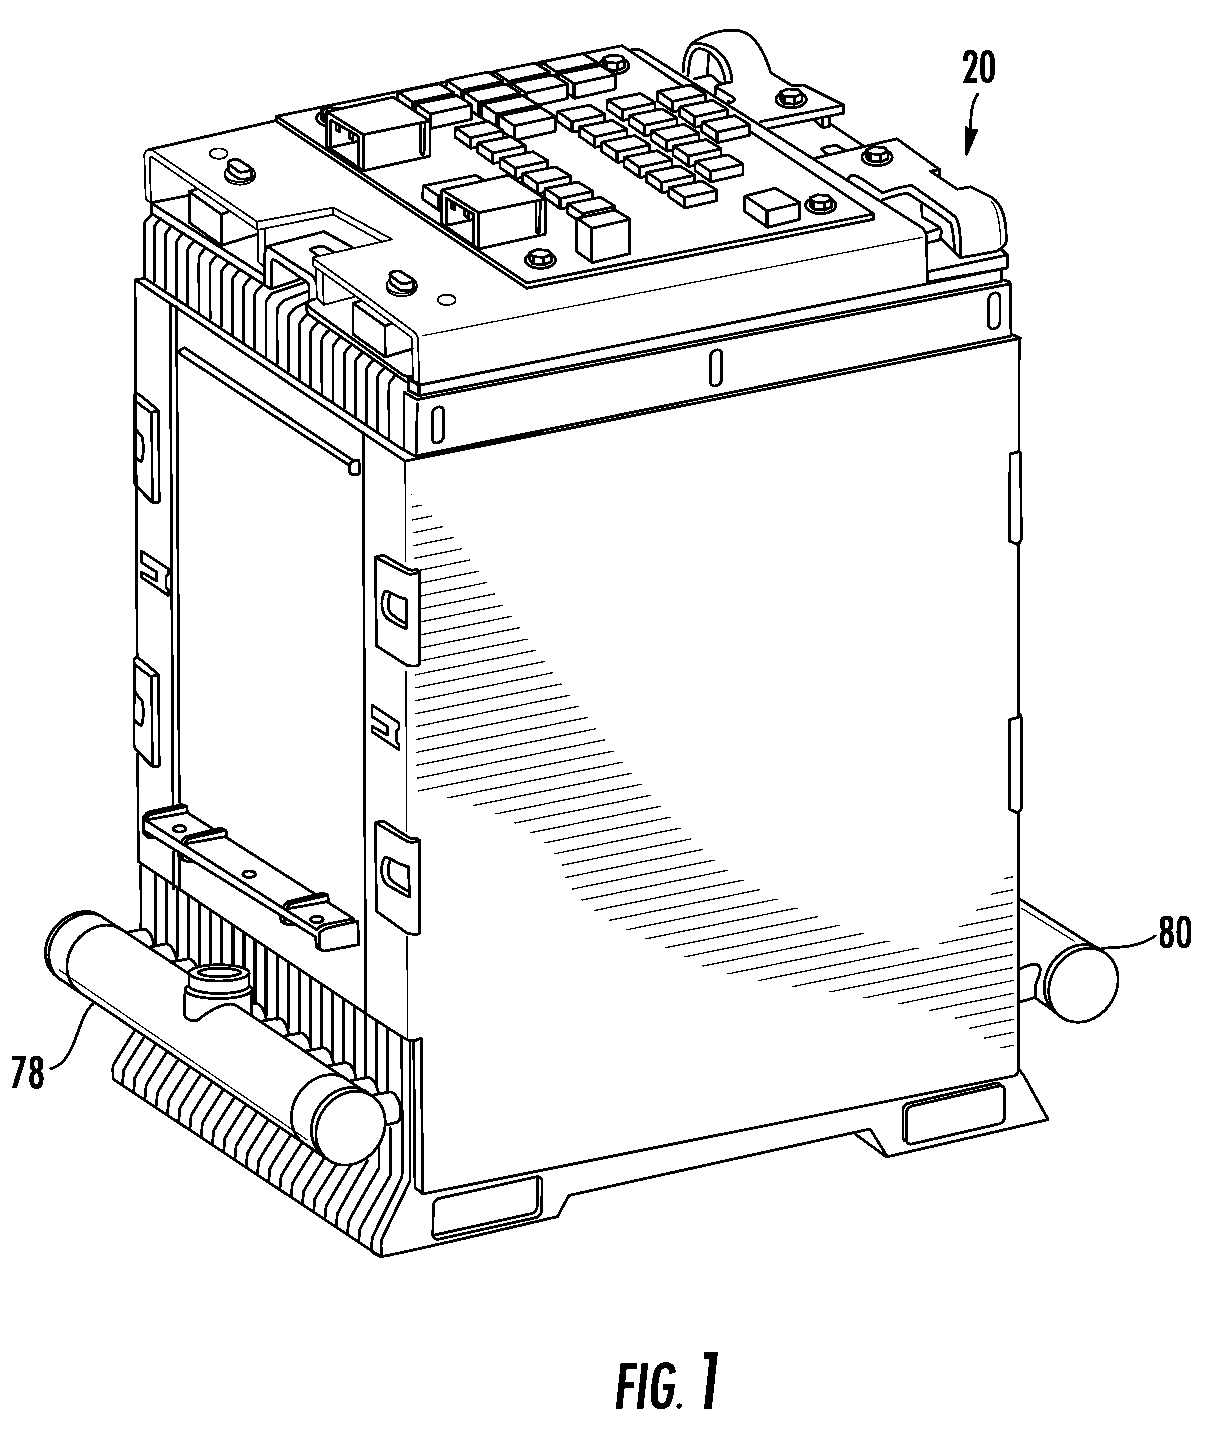 Battery Cell Assembly Having Heat Exchanger With Serpentine Flow Path